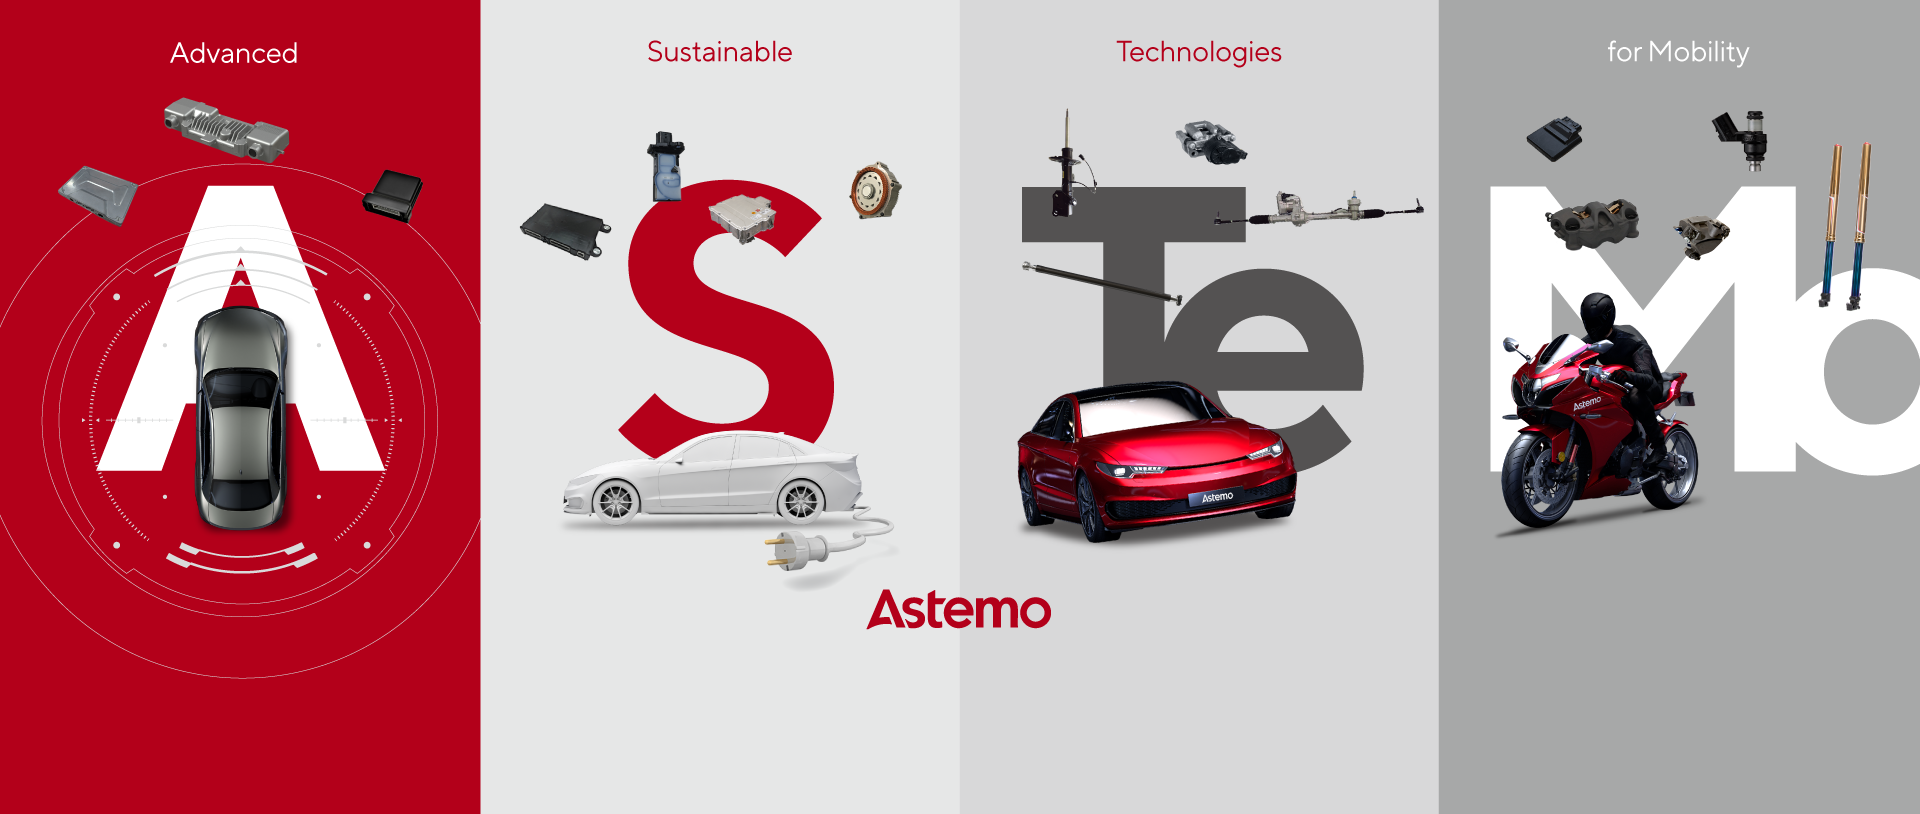 Astemo Empowering mobility.